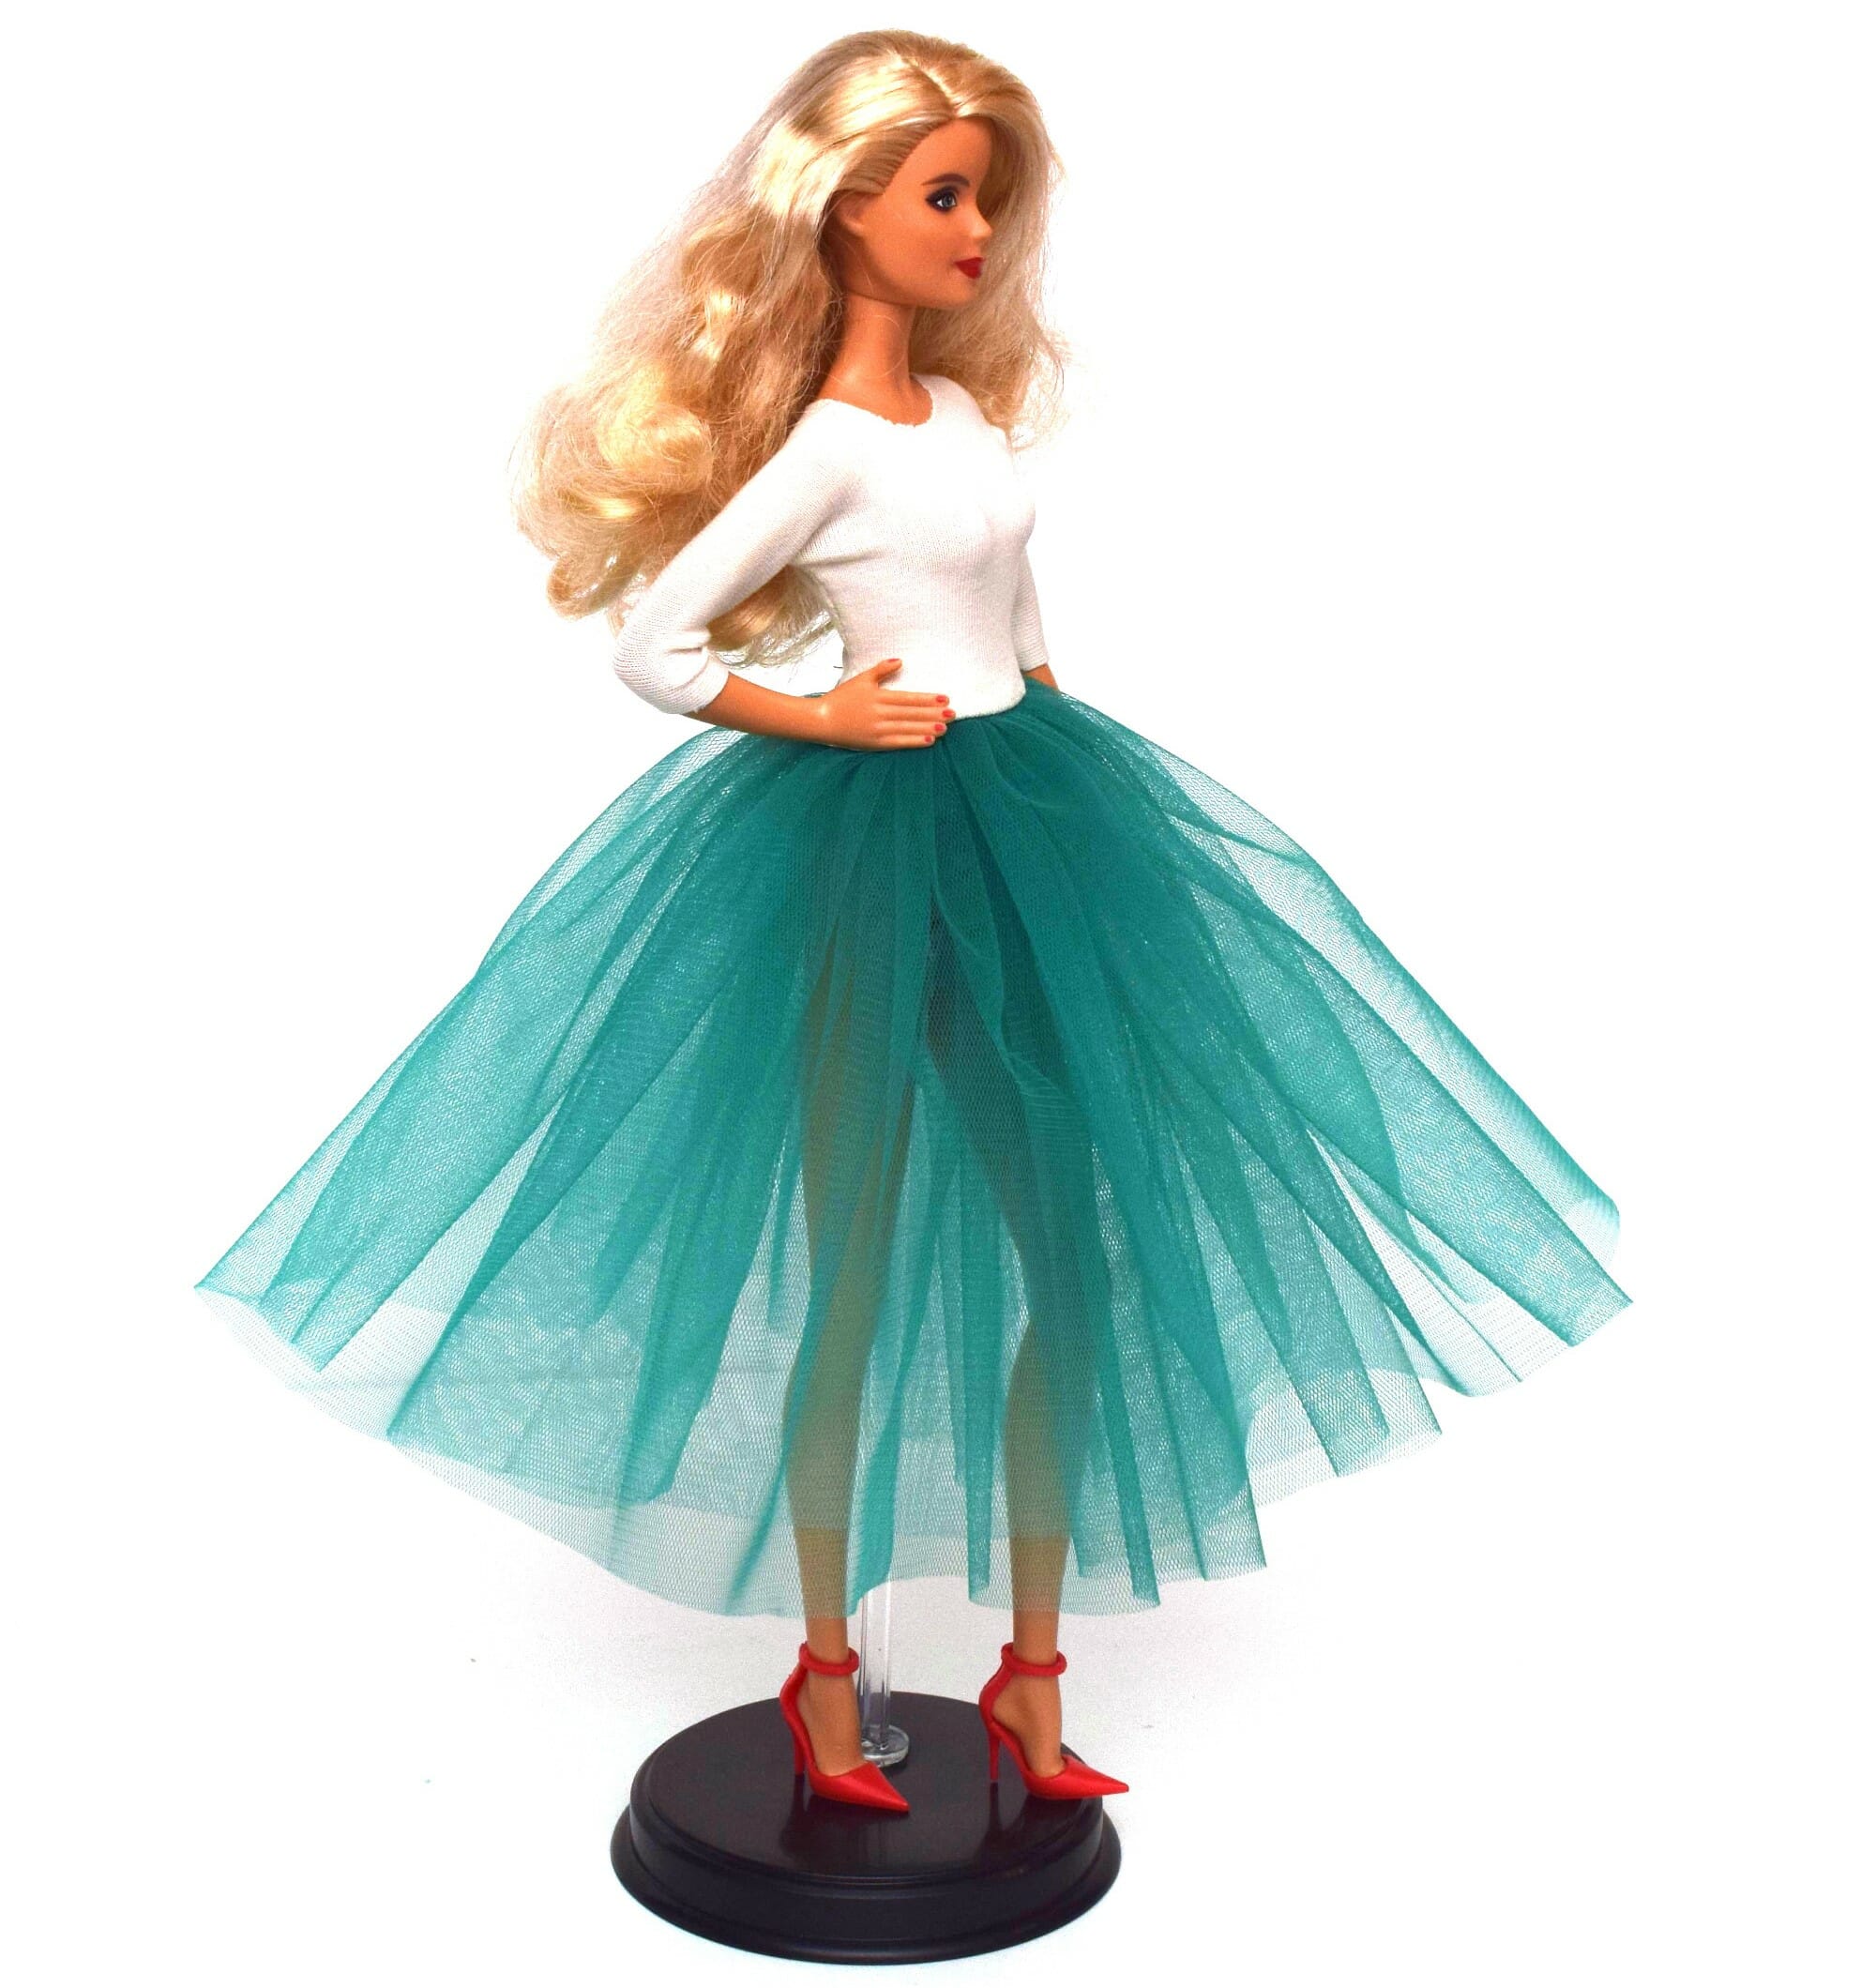 These 15 Barbie Dolls Will Give You Total Outfit Inspiration | Teen Vogue